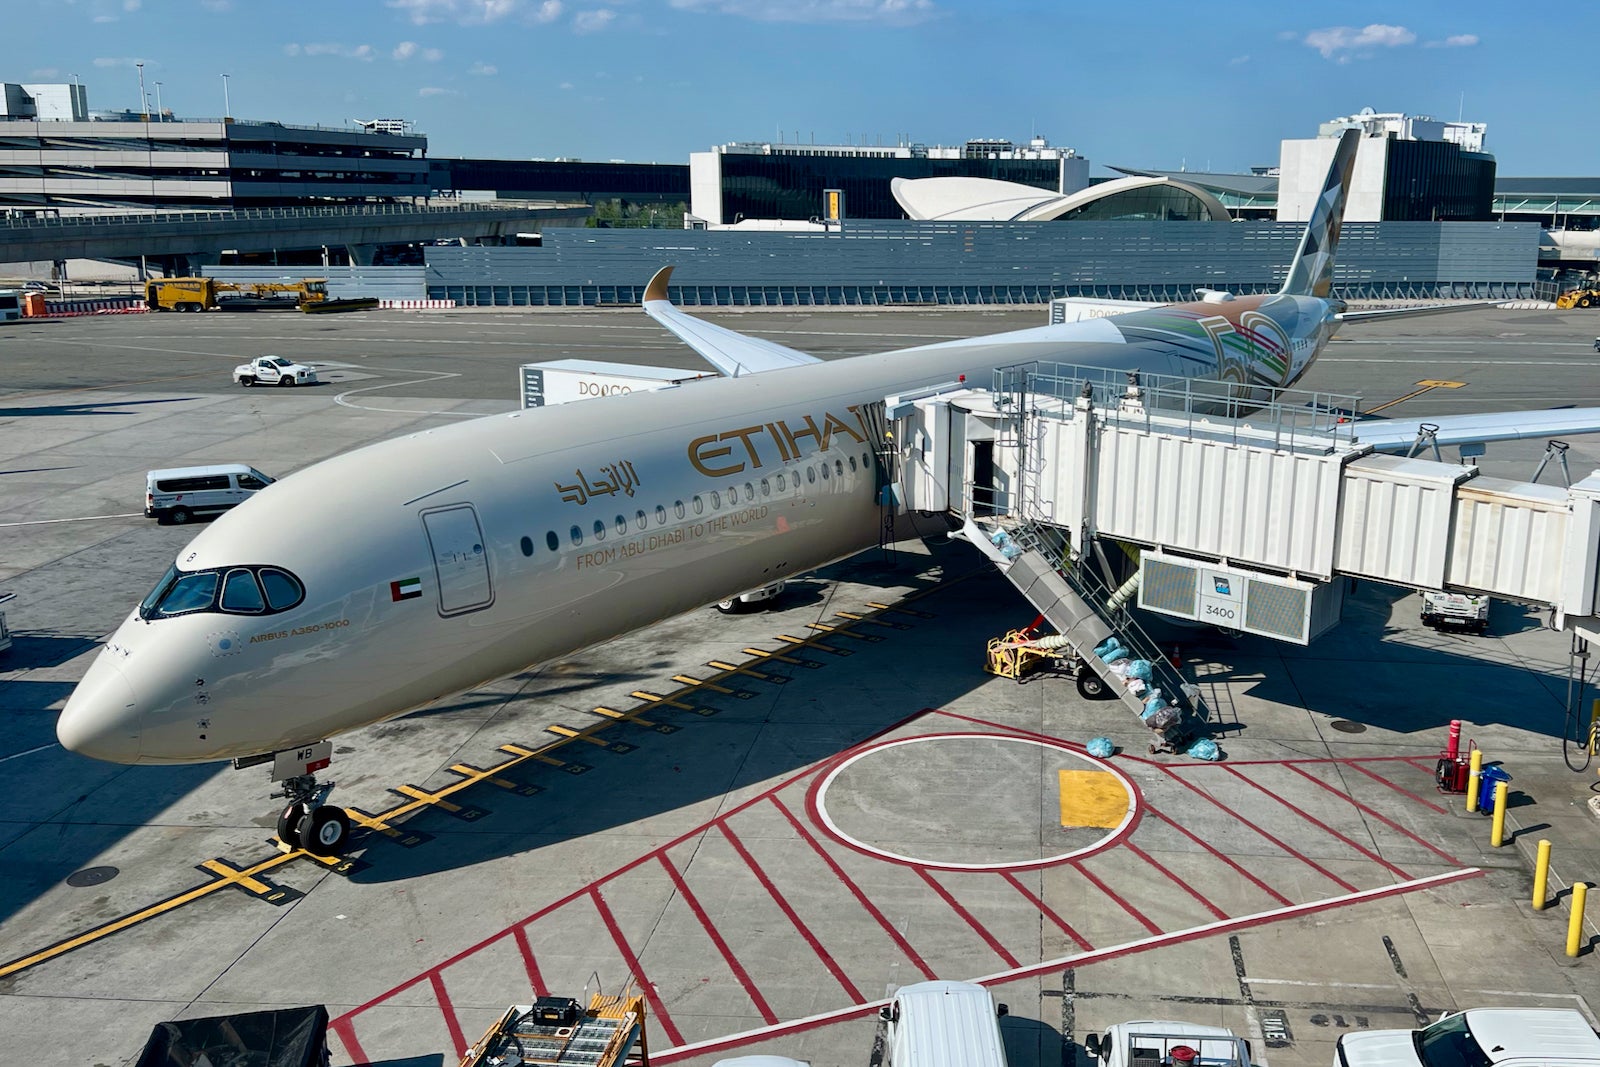 A Etihad plan docked at an airport